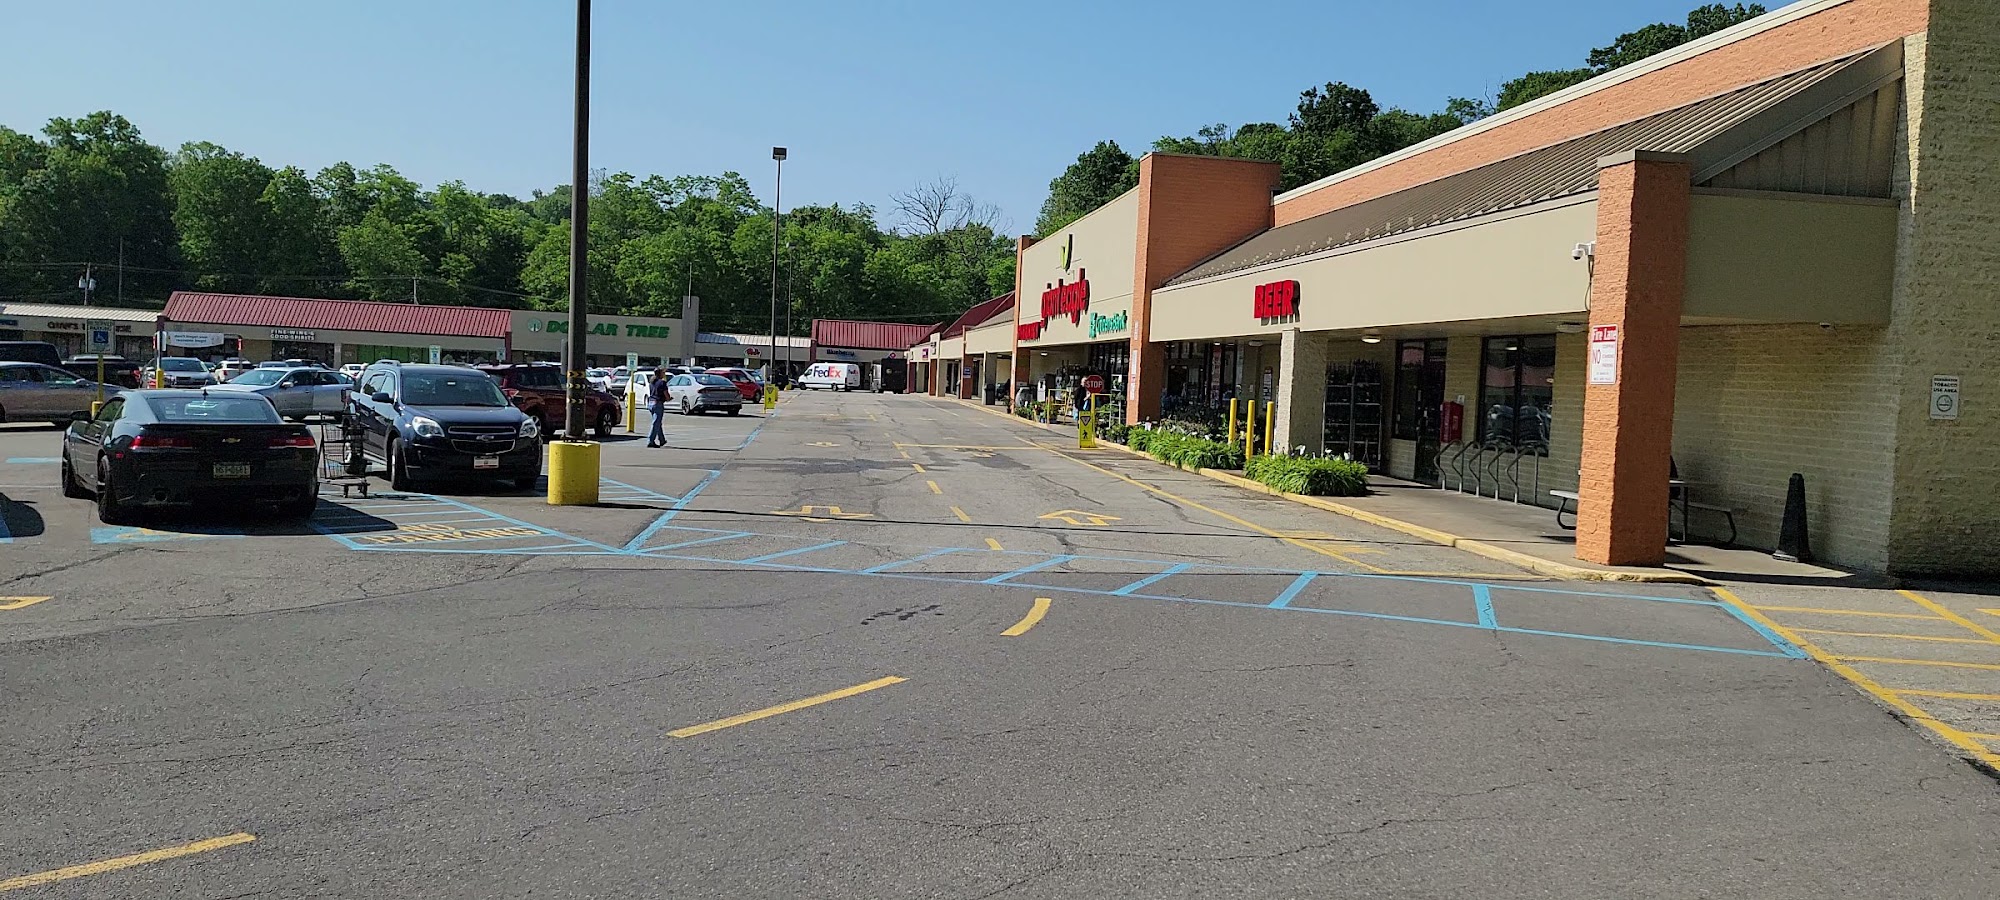 West View Park Shopping Center